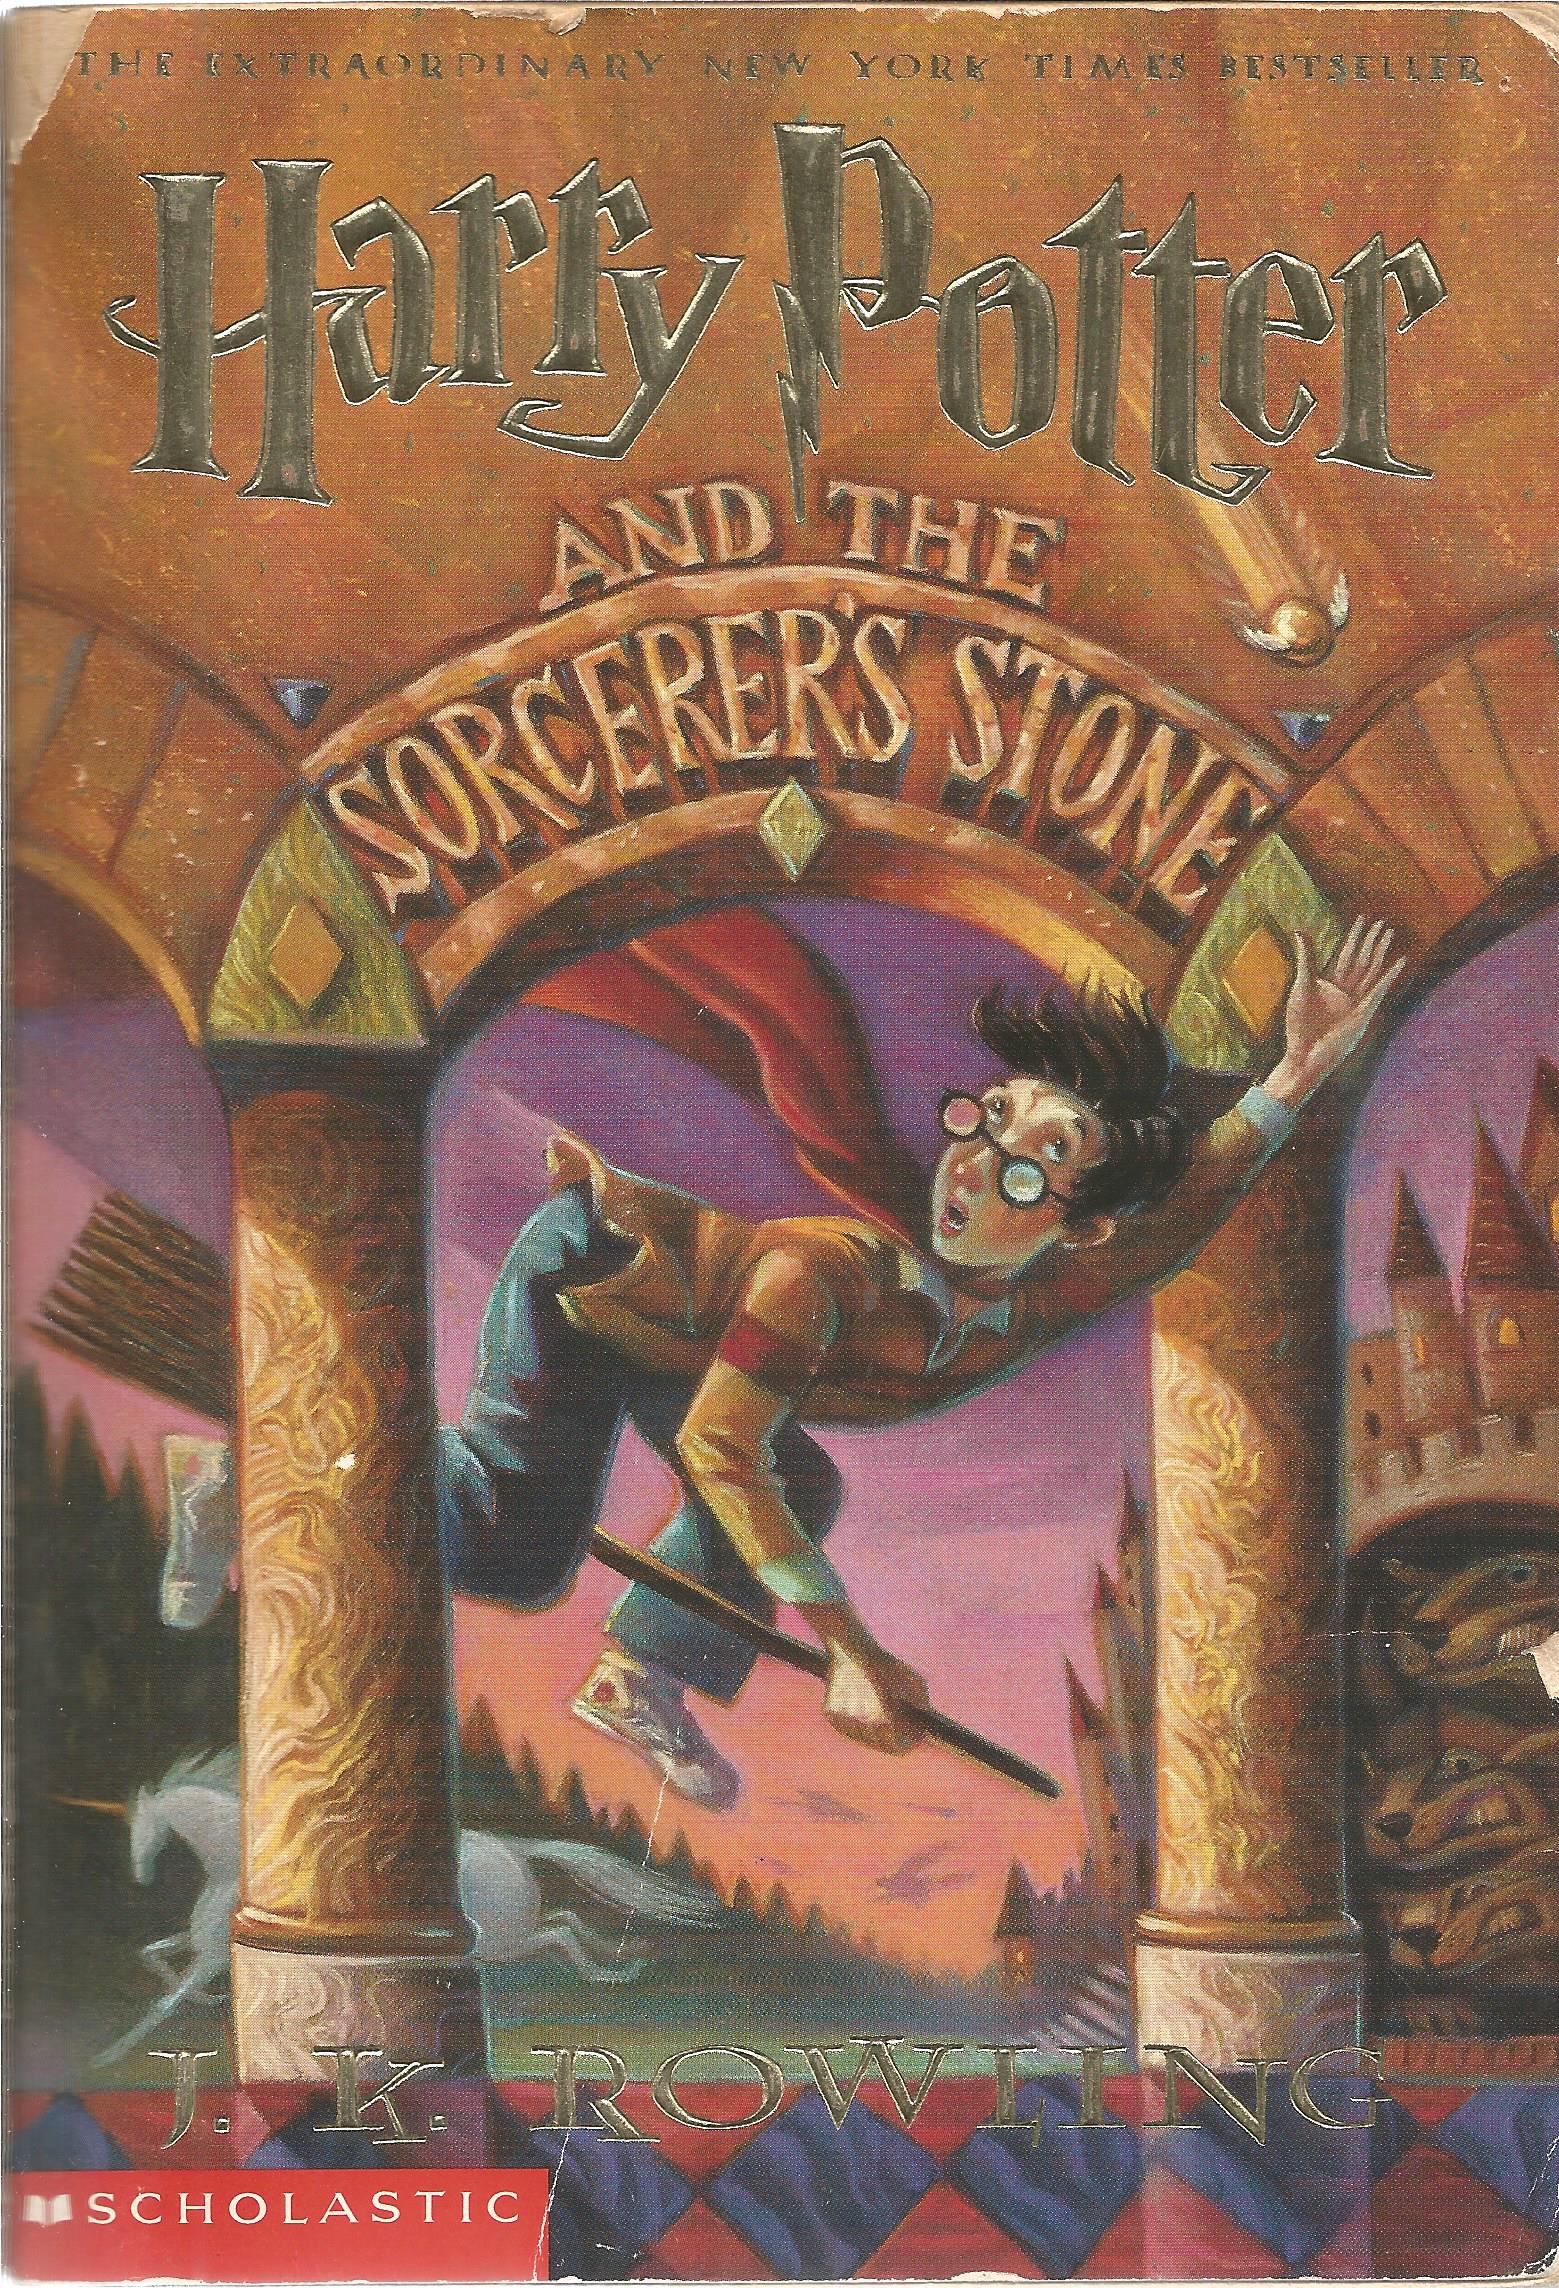 Harry Potter and the Sorcerer's Stone by J. K. Rowling. Paperback in OK condition, the cover has